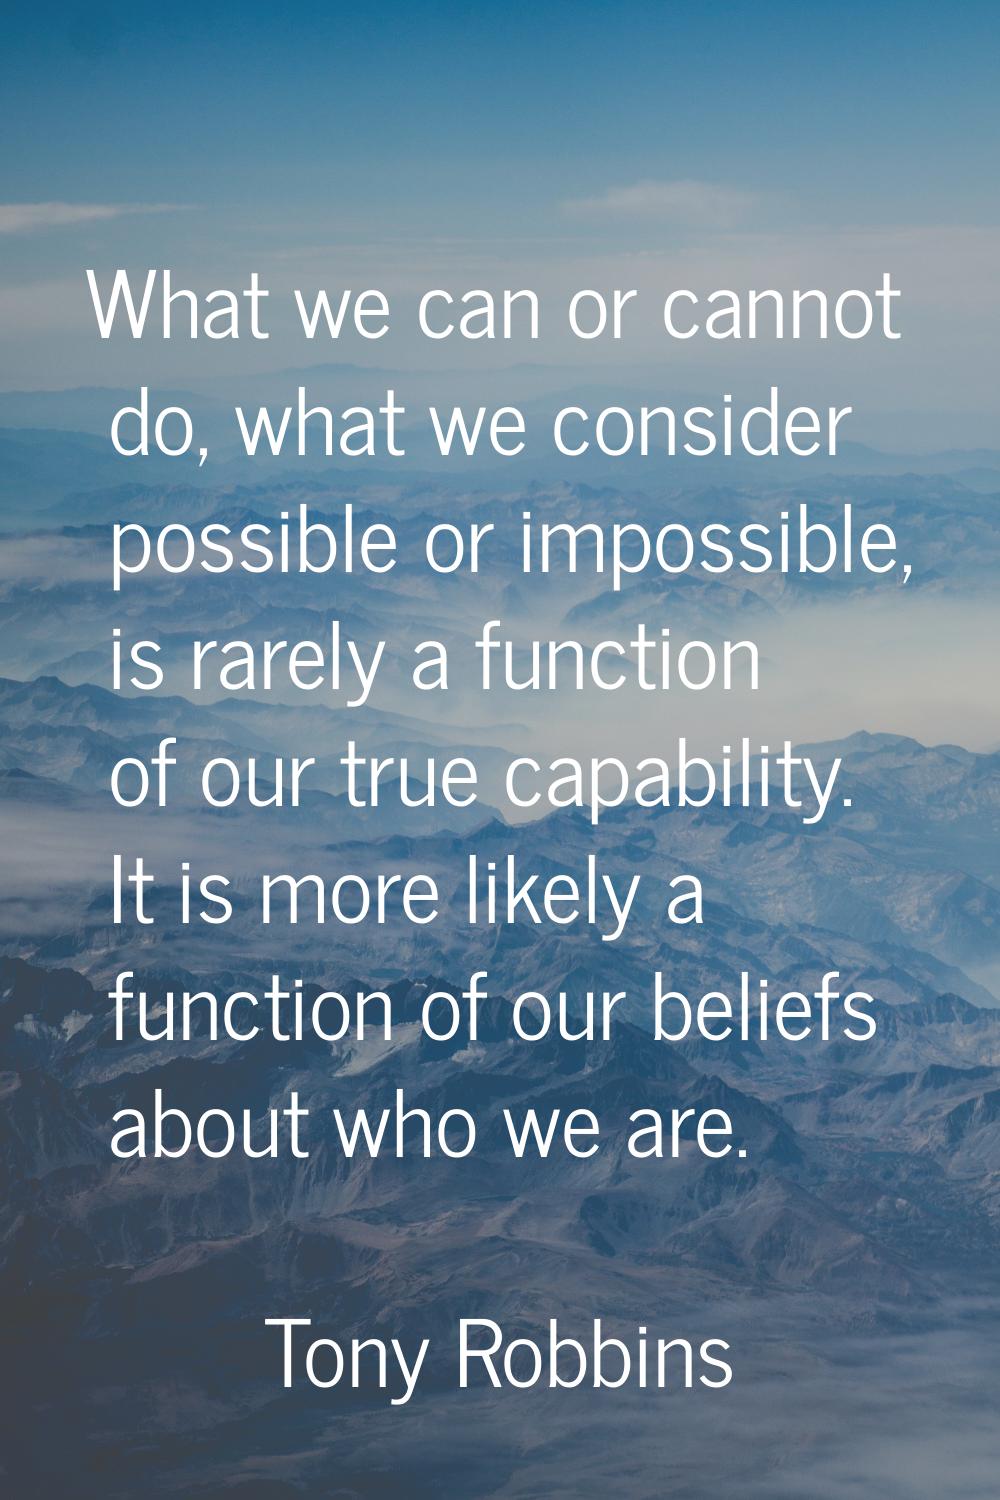 What we can or cannot do, what we consider possible or impossible, is rarely a function of our true